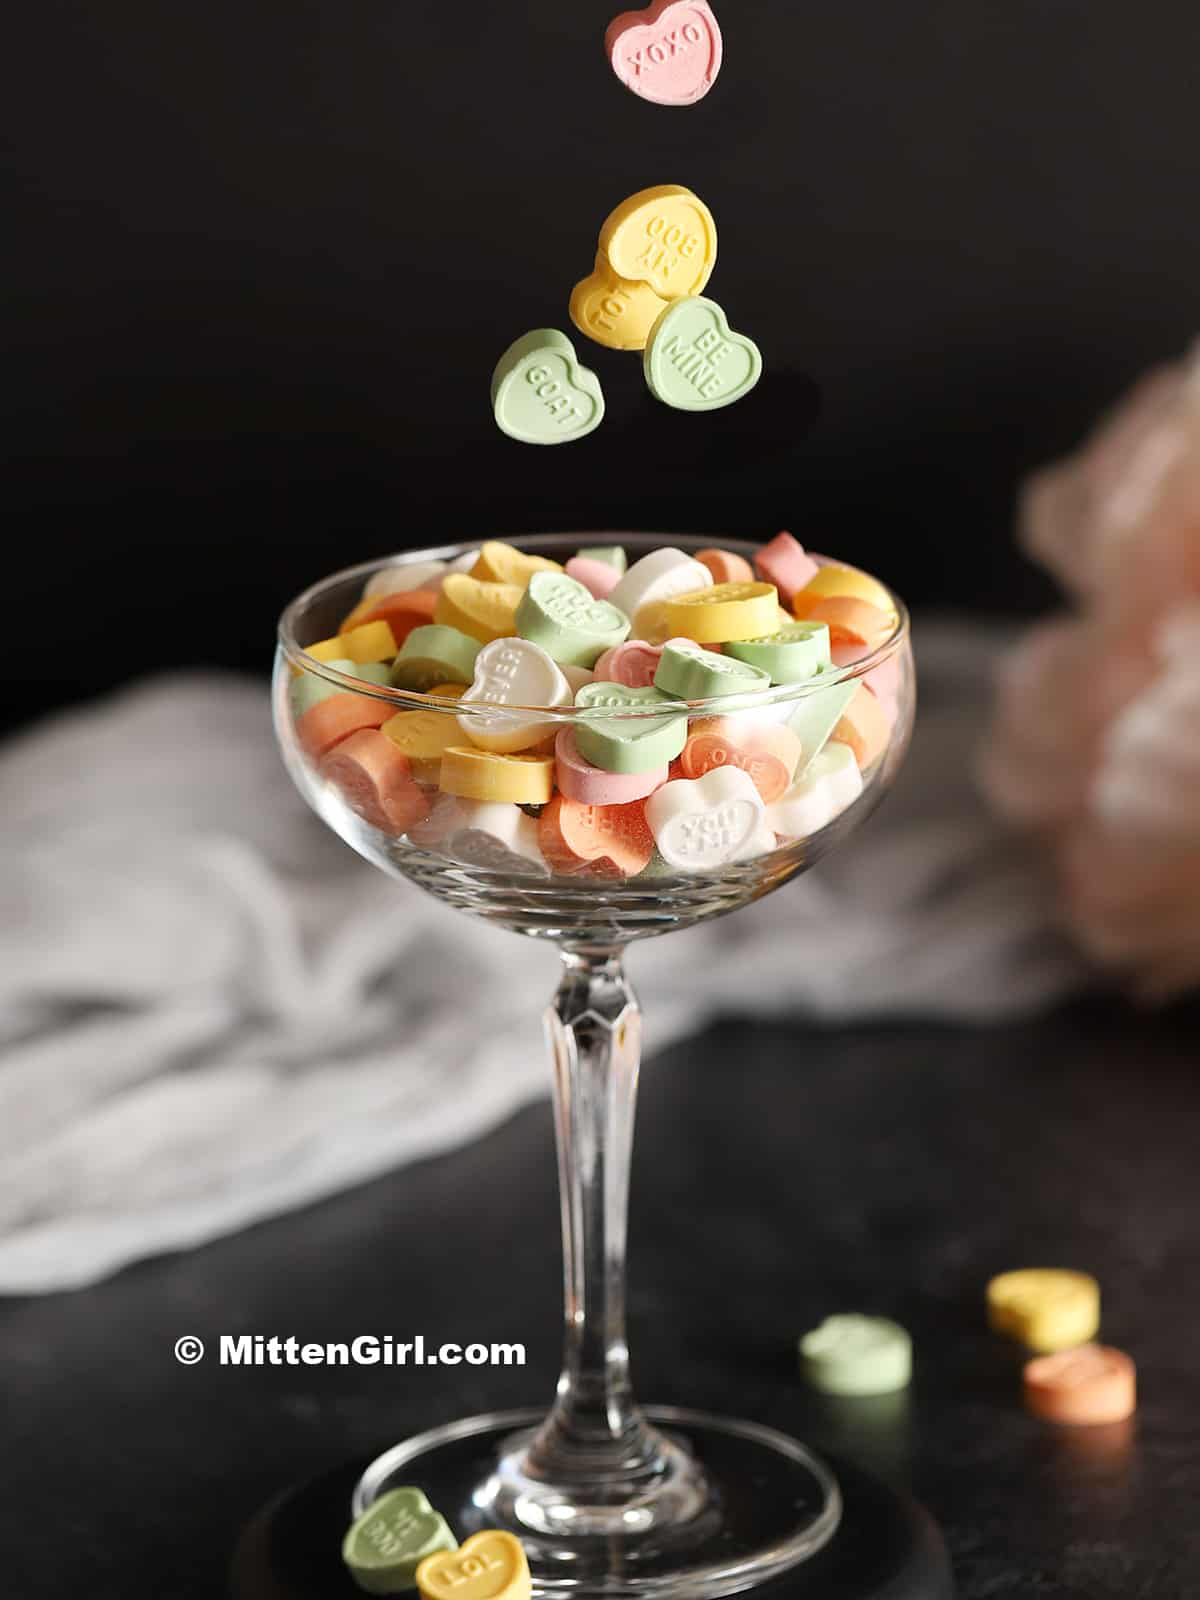 Conversation heart candies falling into a coupe glass.